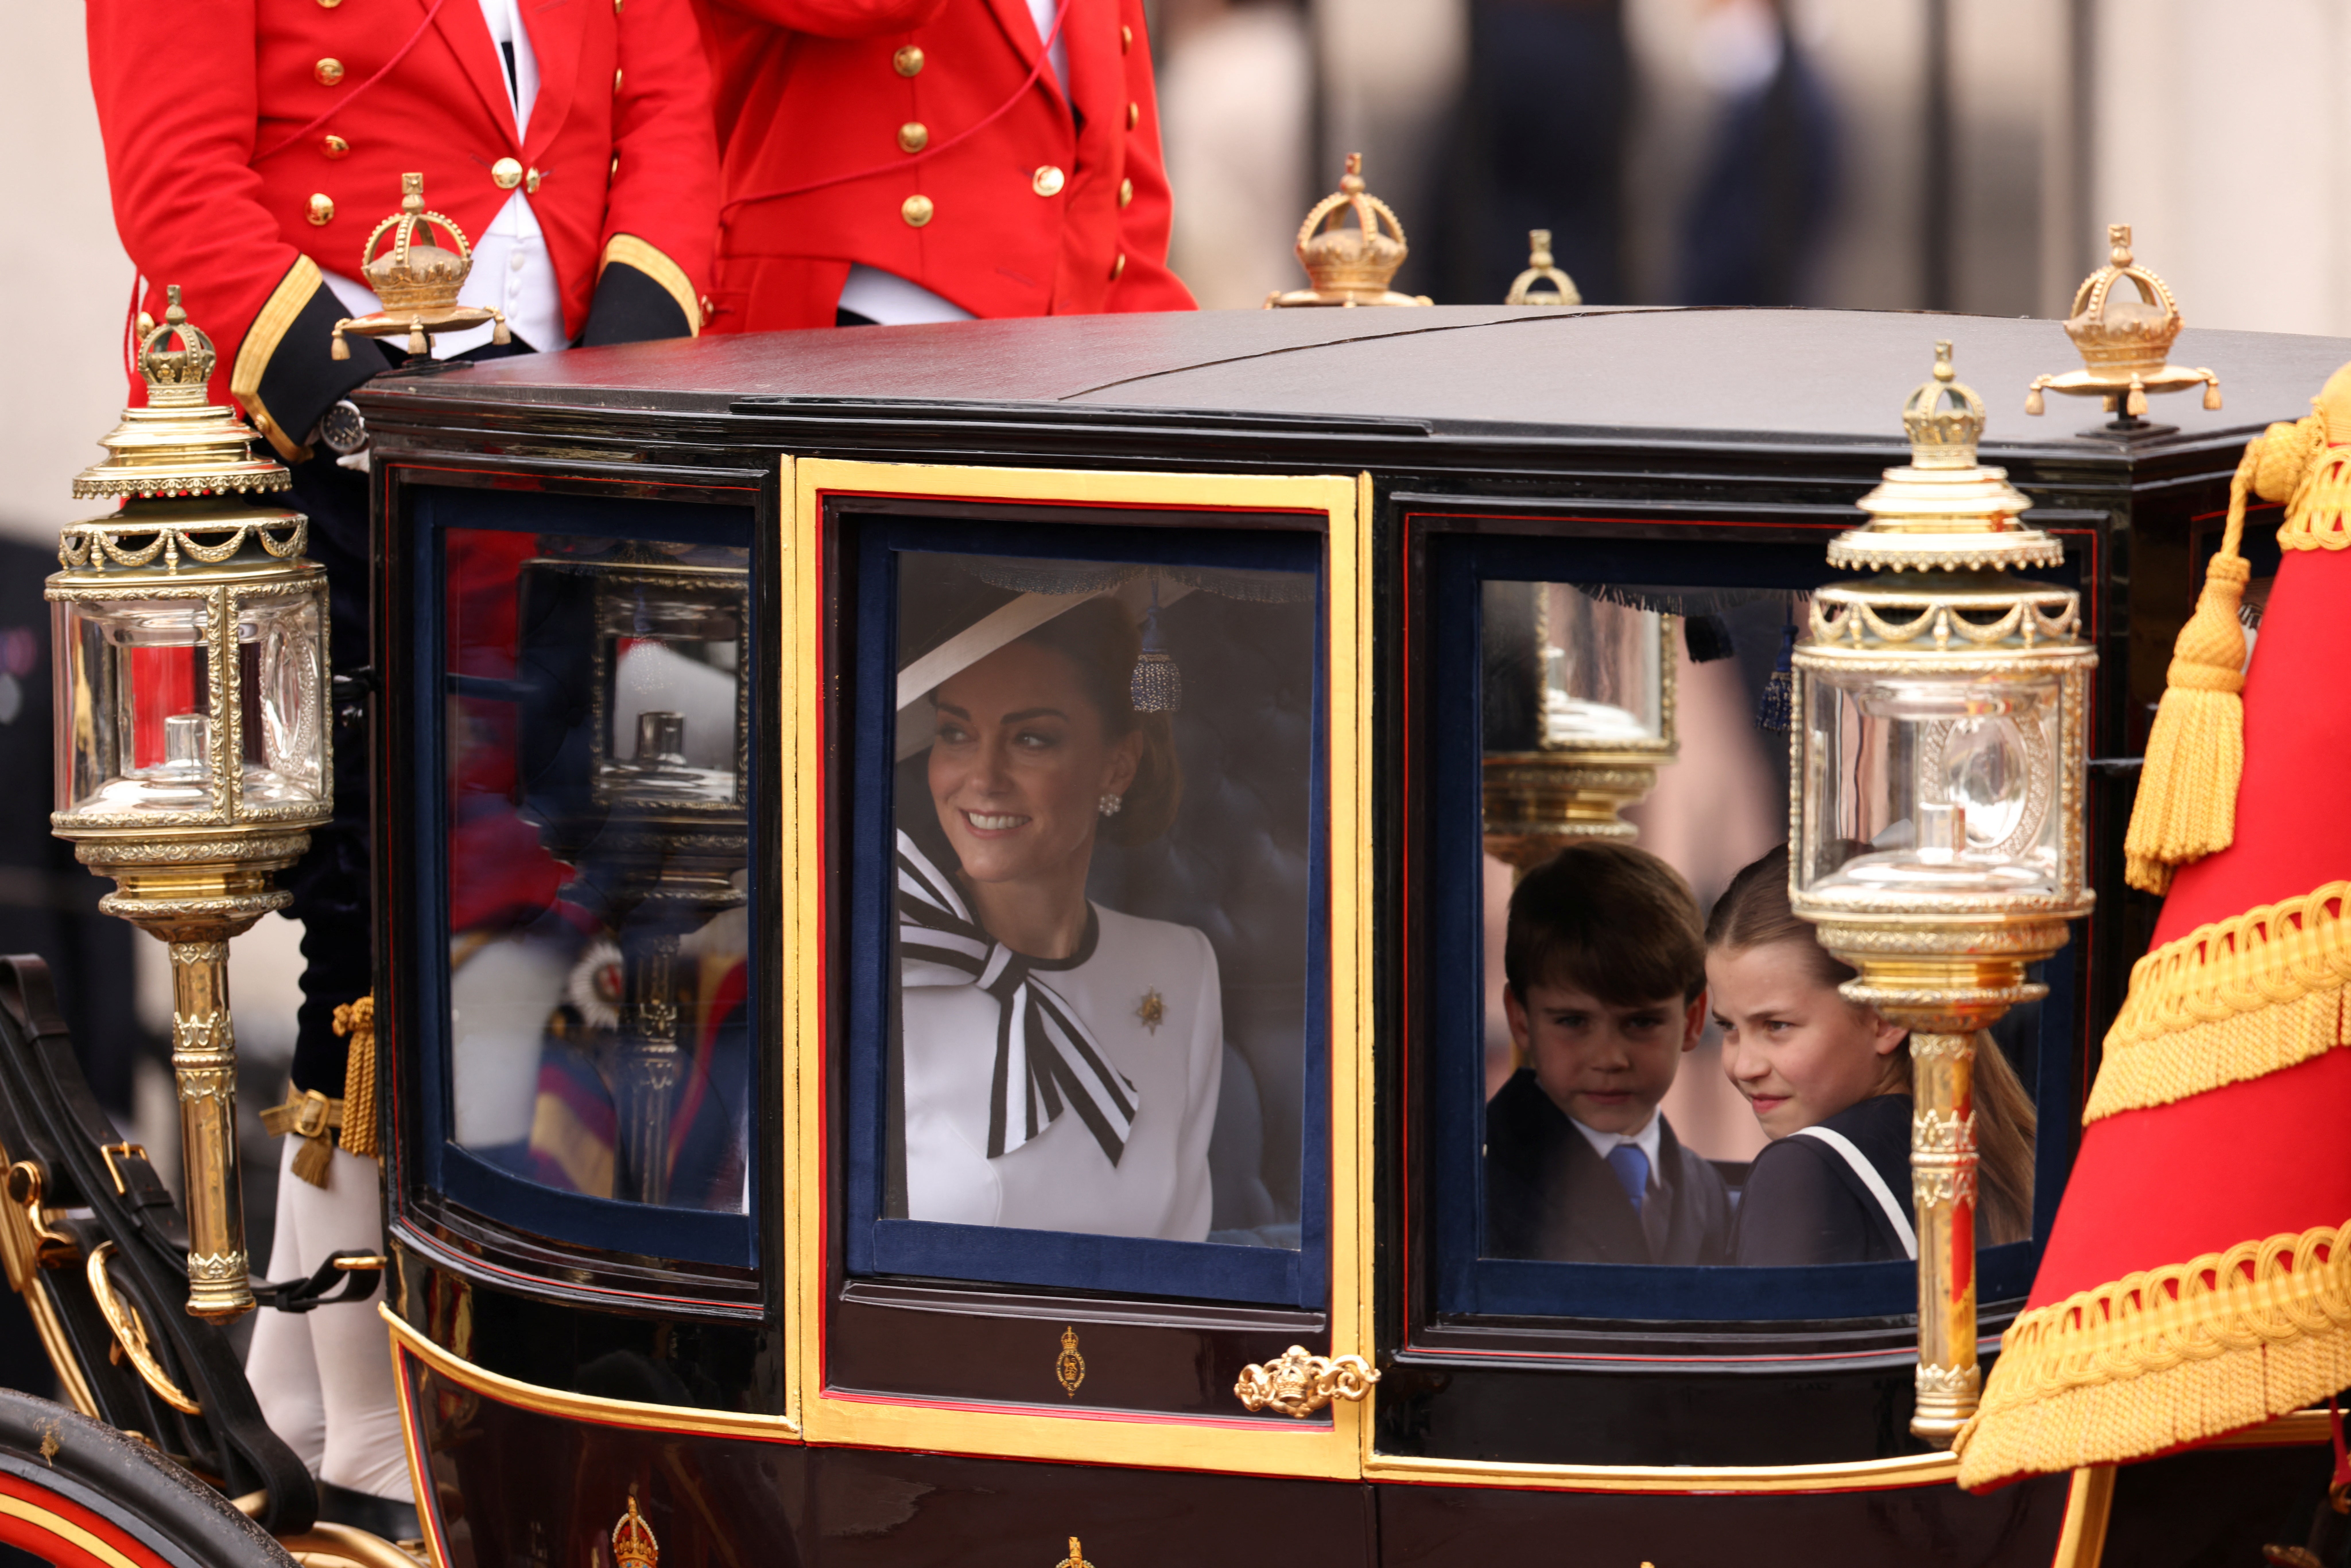 The Princess of Wales smiled to the crowds as she made her way down the Mall